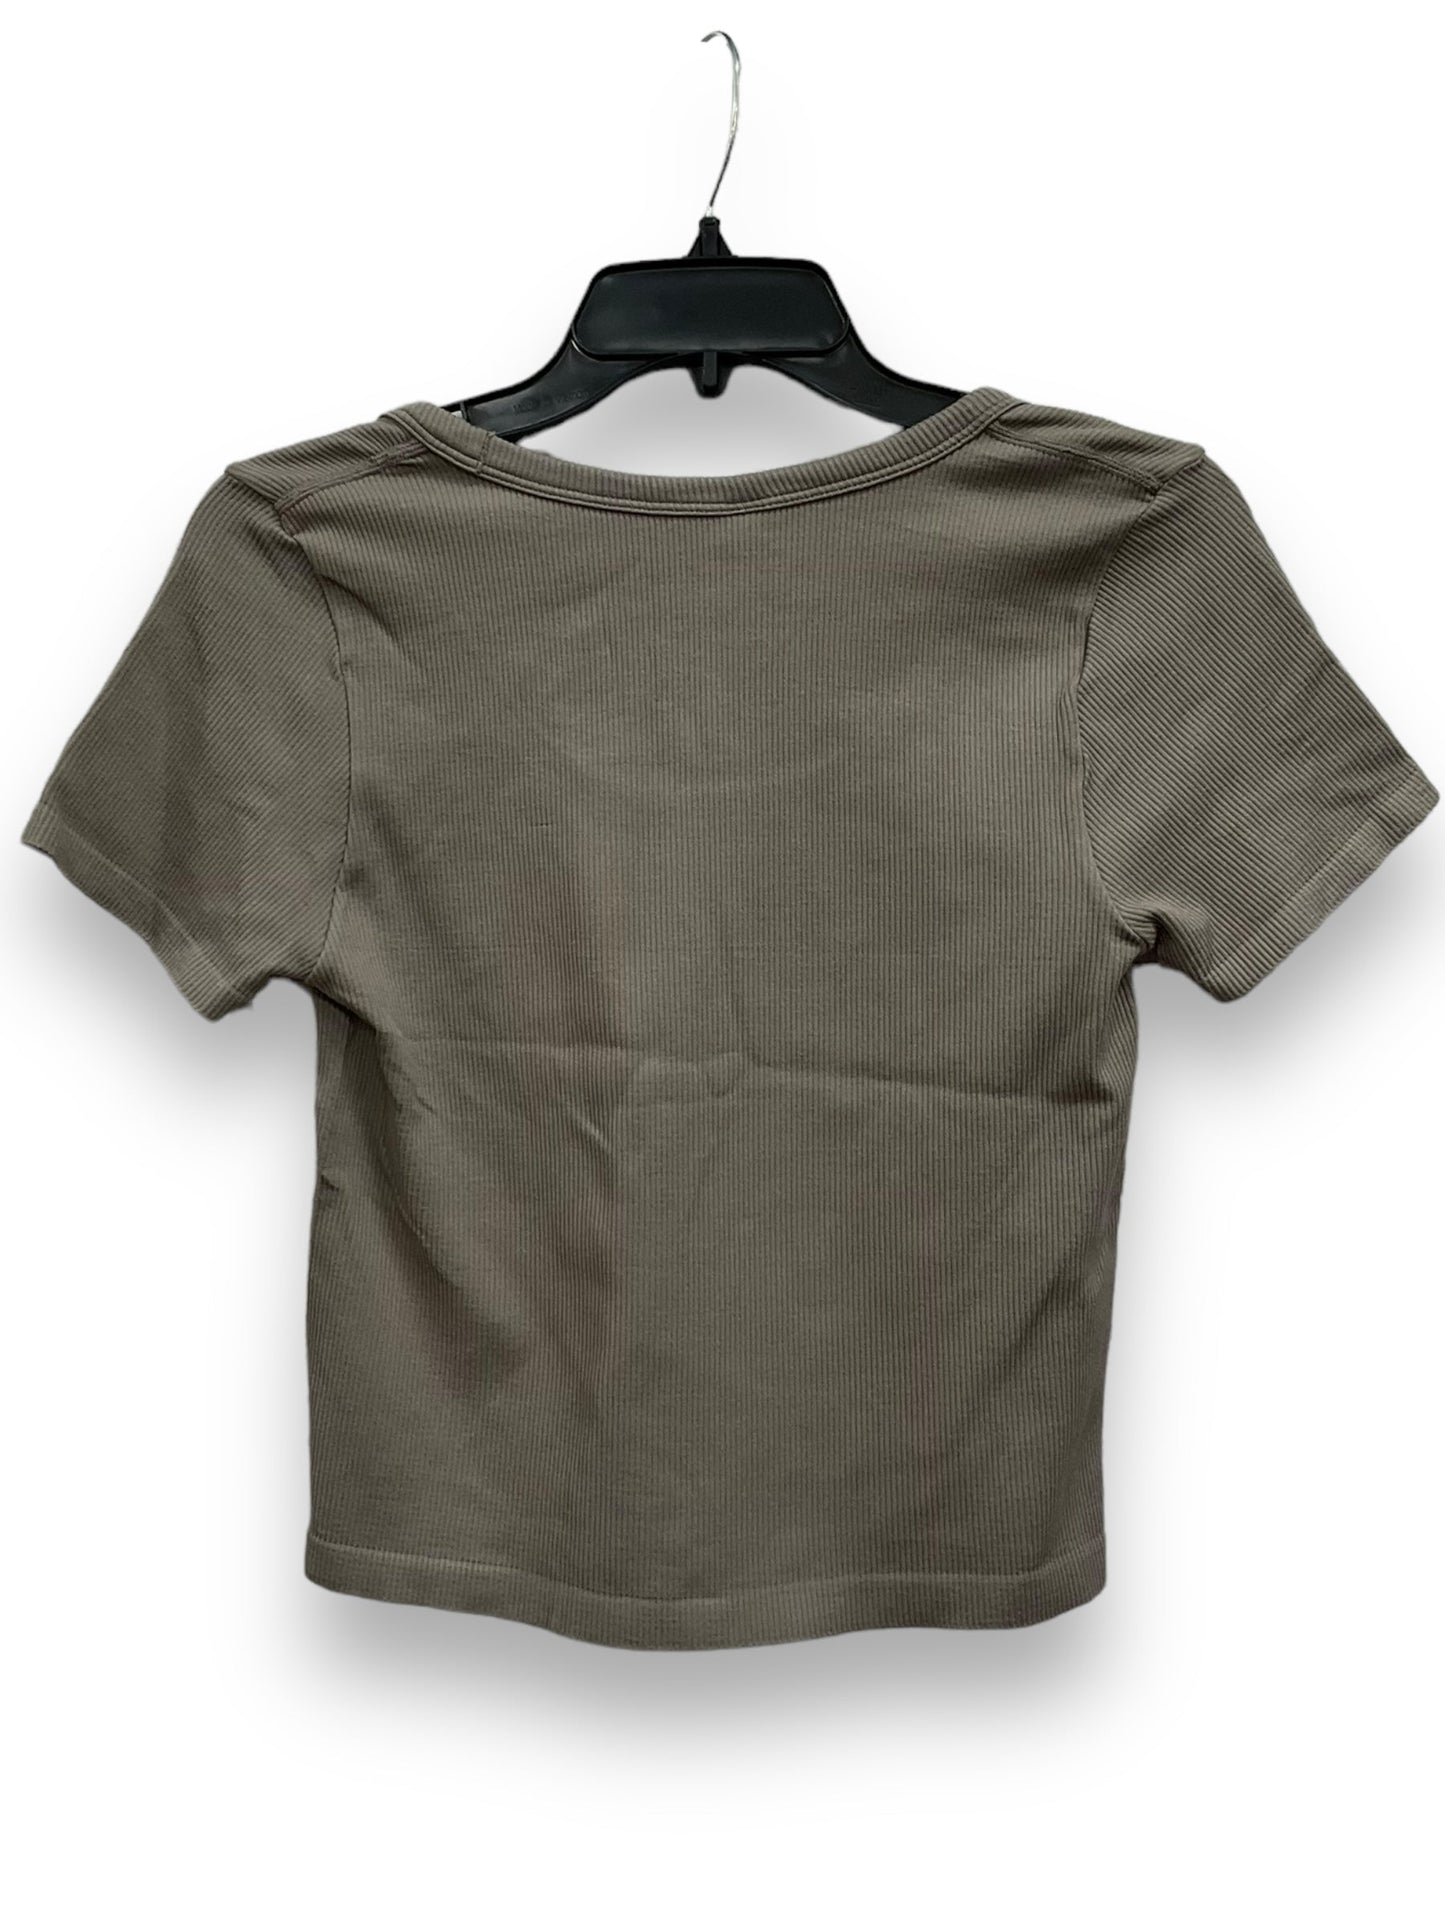 Taupe Athletic Top Short Sleeve 90 Degrees By Reflex, Size L